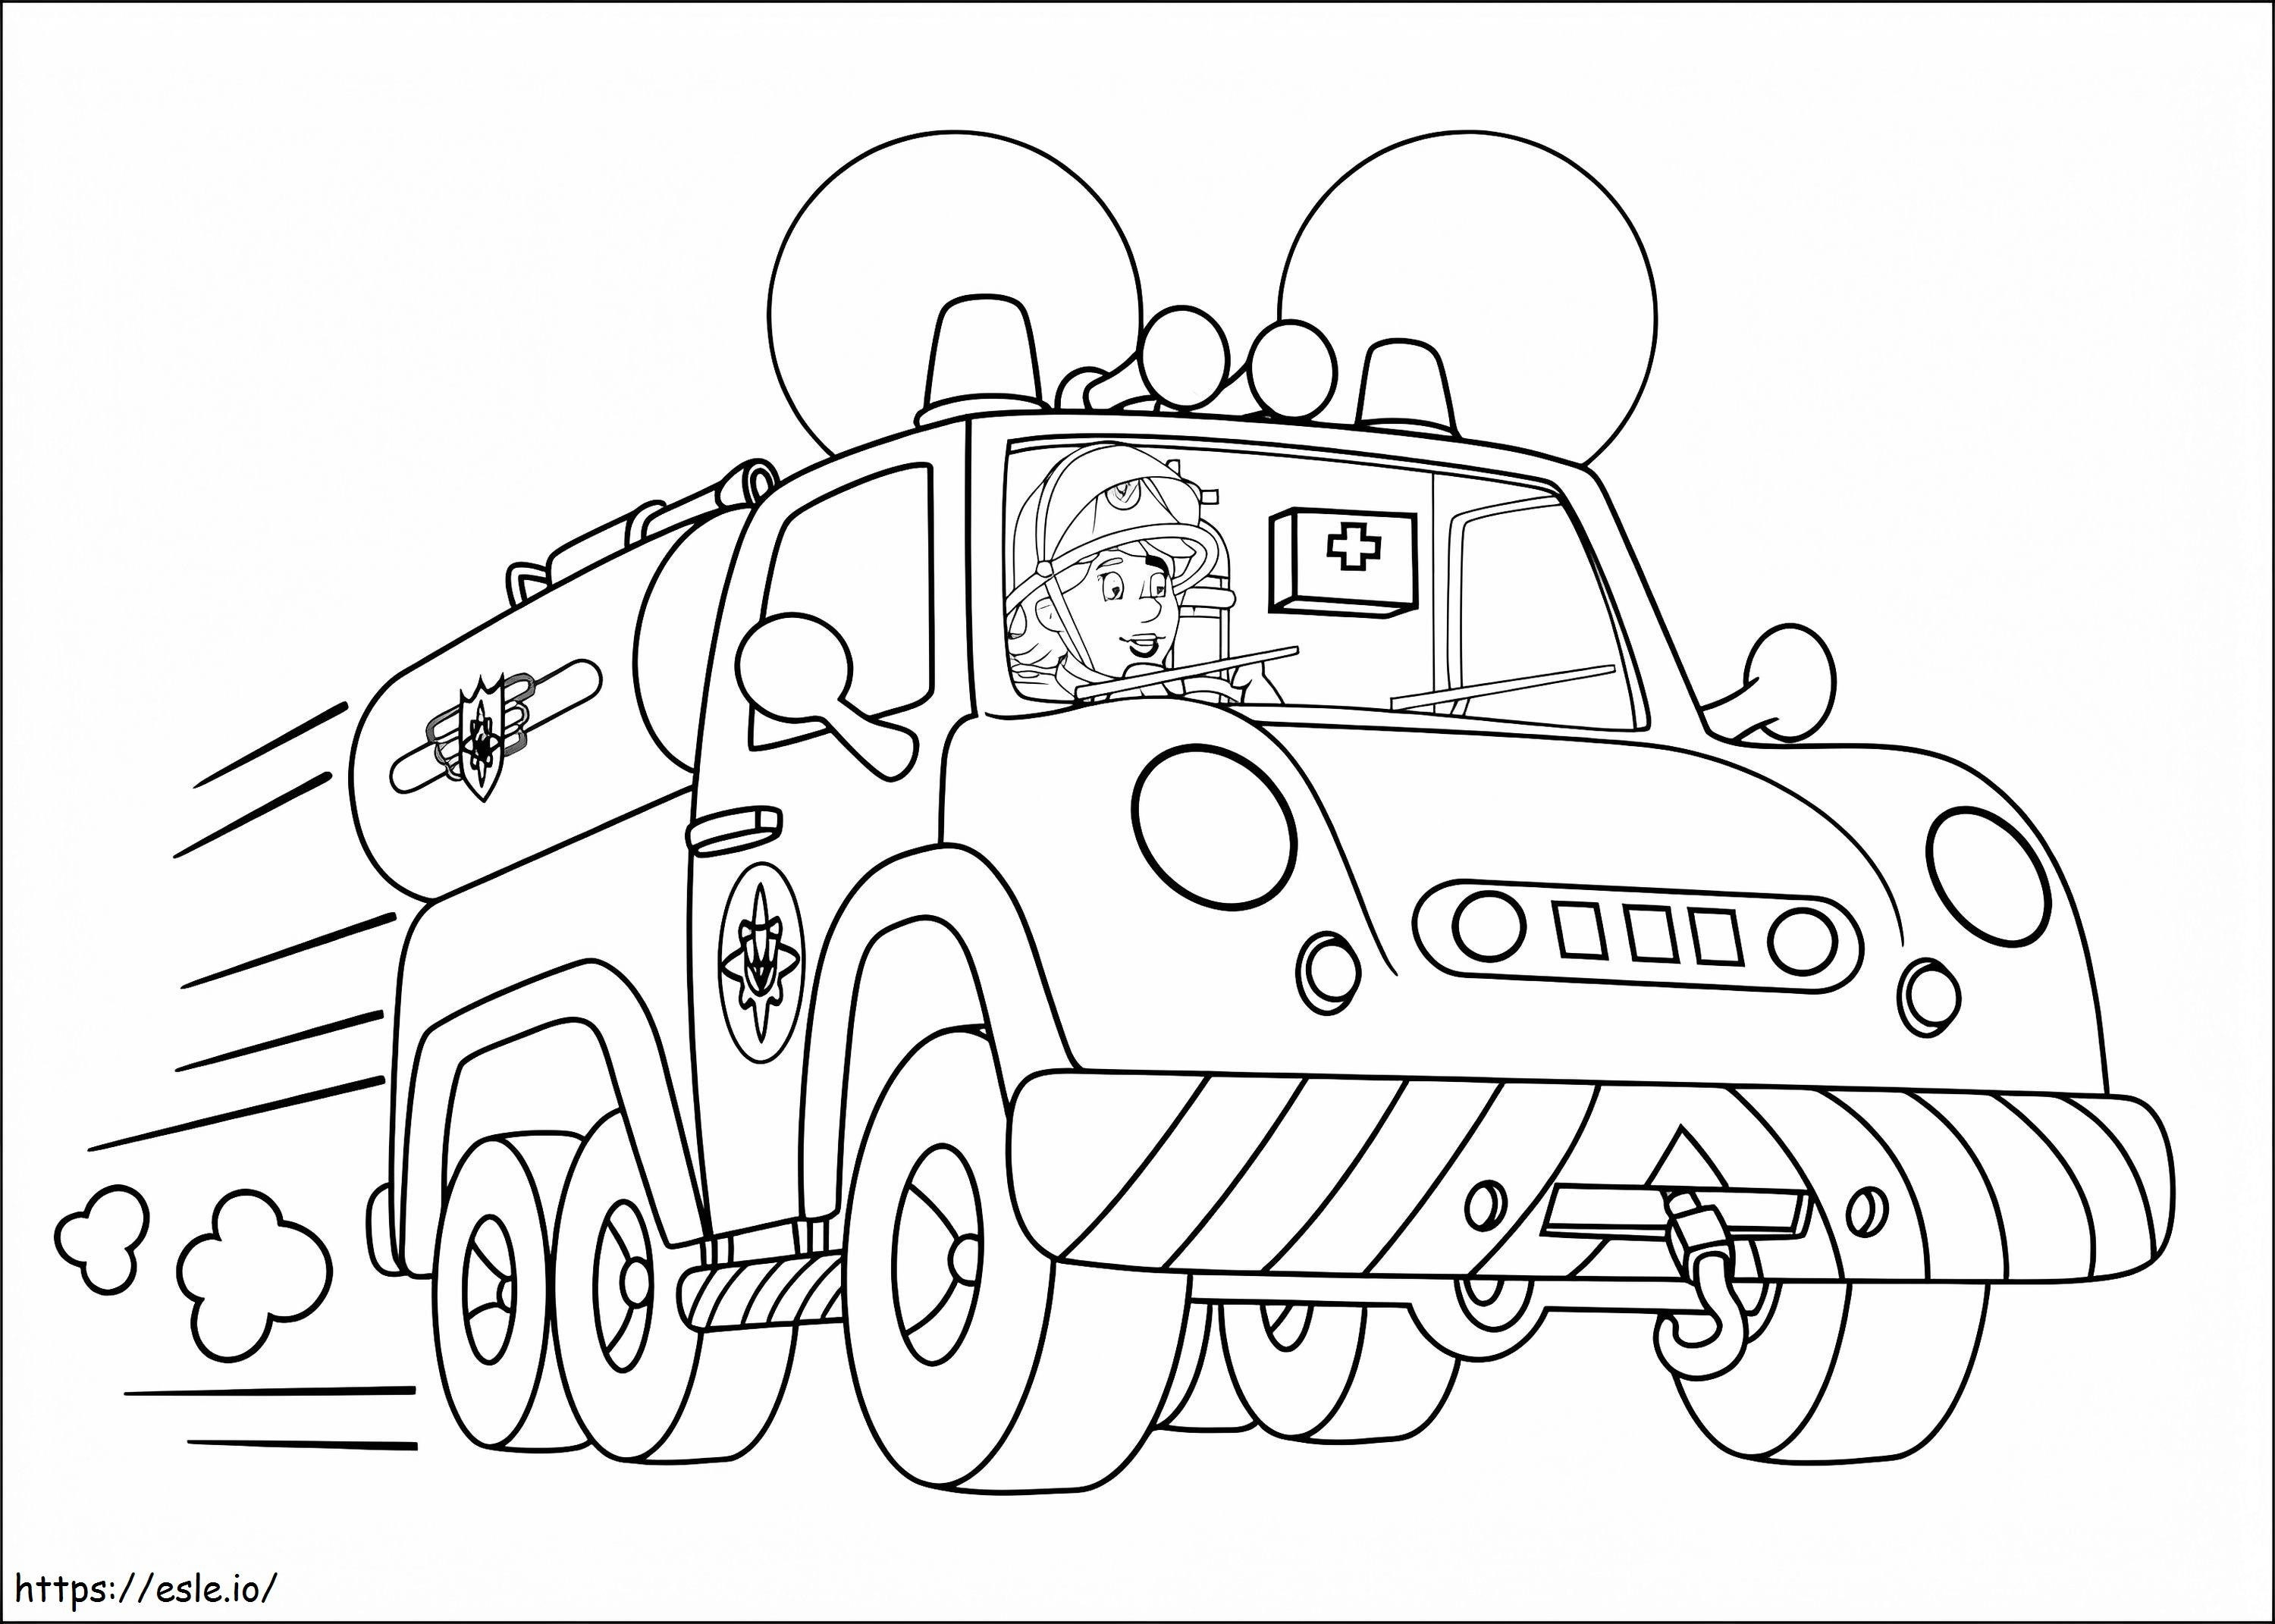 Penny Morris 1 coloring page